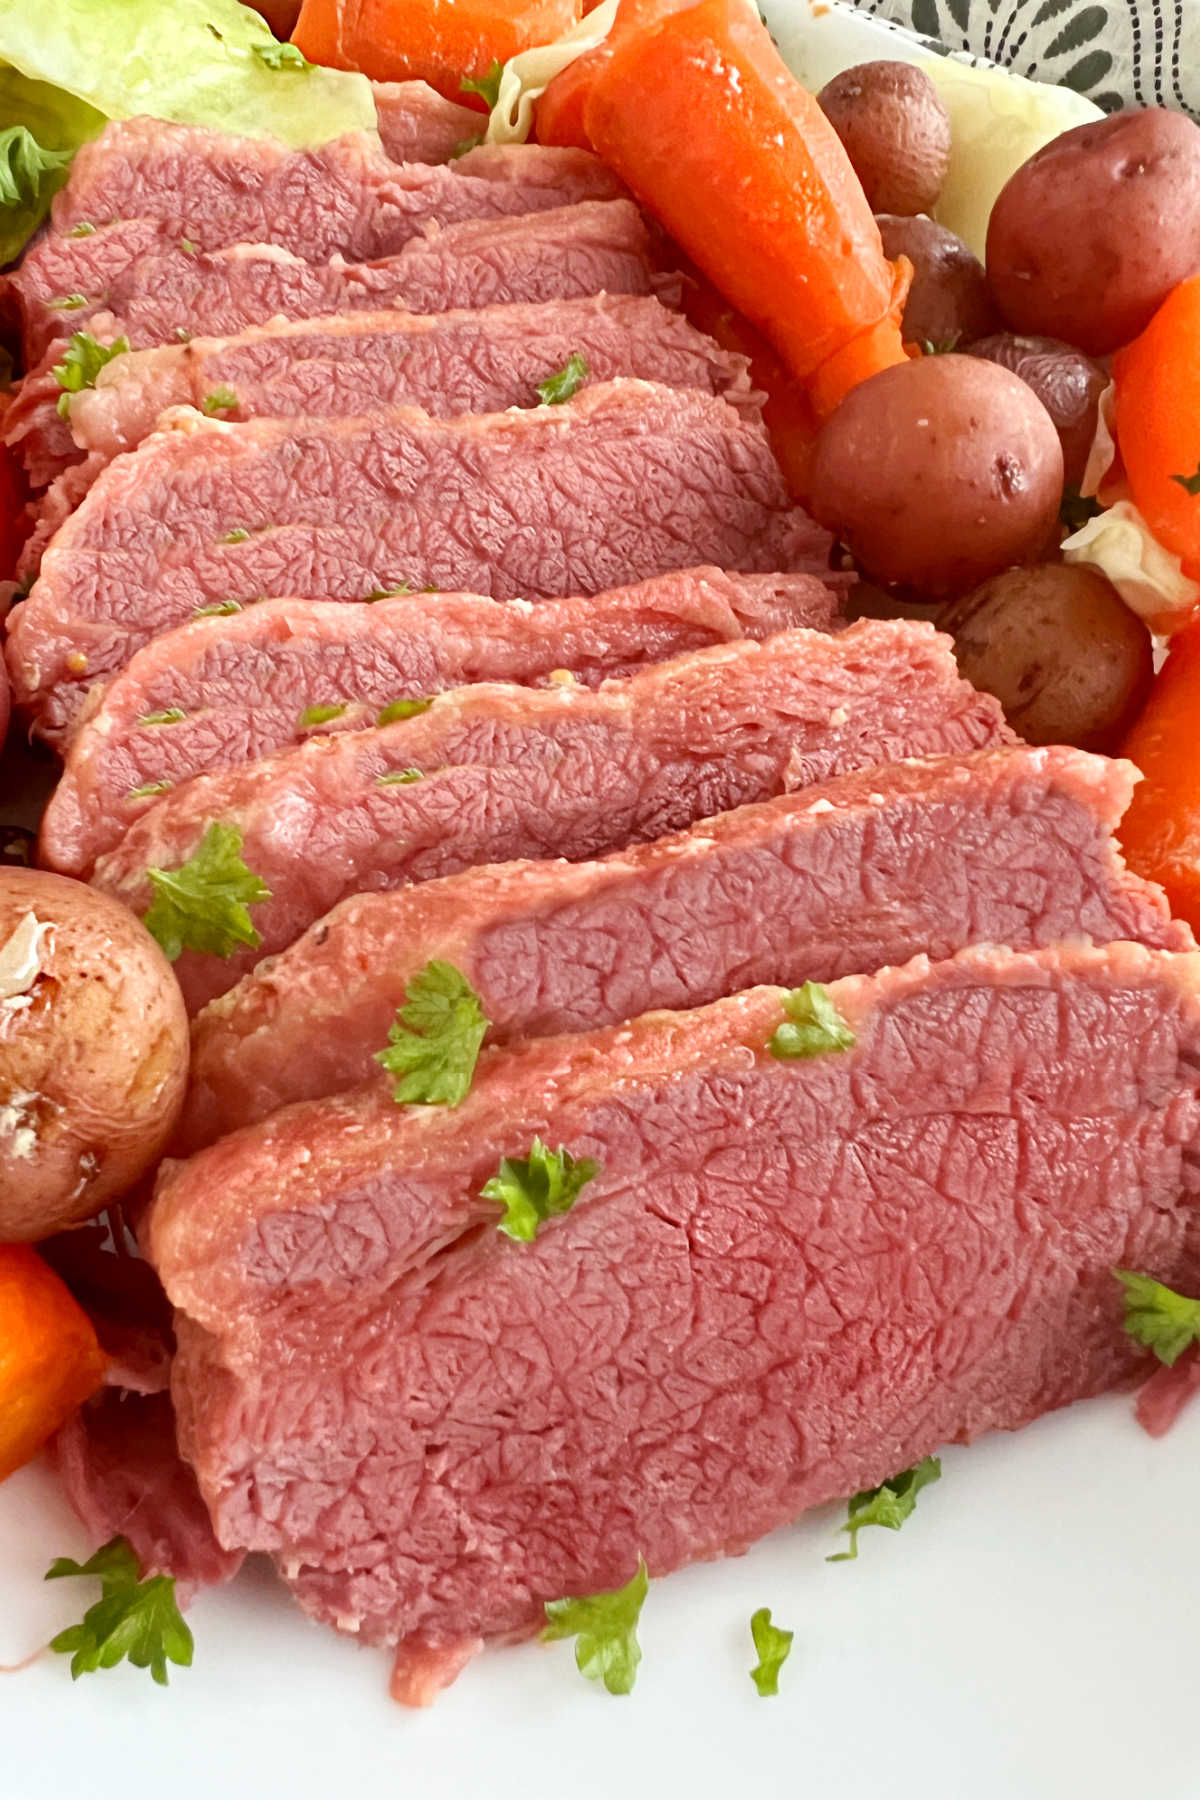 platter of baked corned beef and cabbage with potatoes and carrots